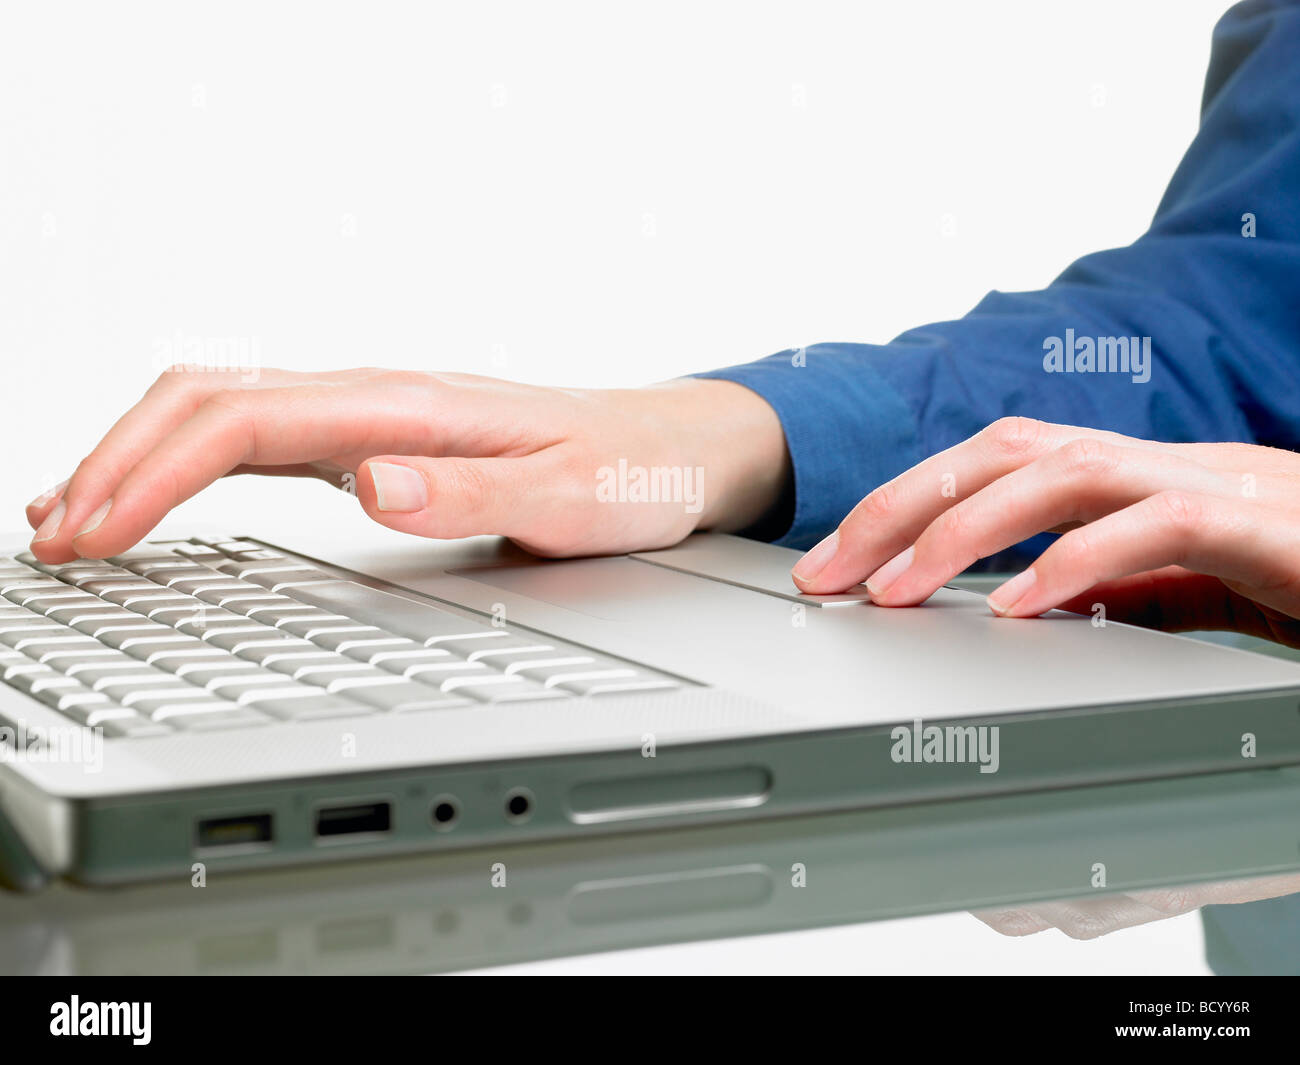 Hands of a woman, on computer Stock Photo